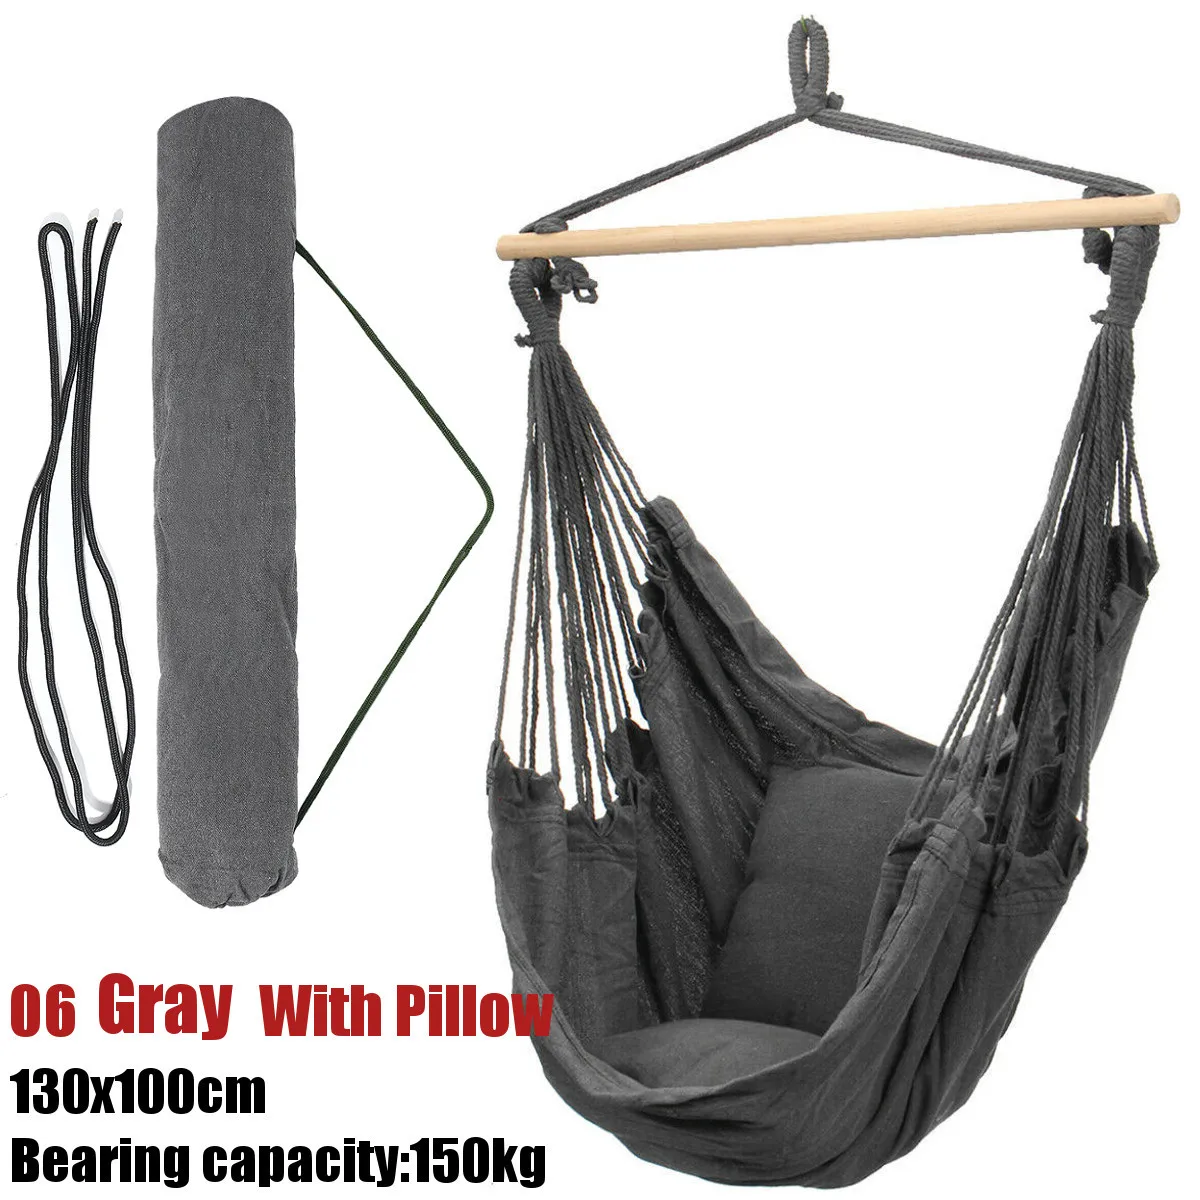 Hanging Hammock Chair Swing With Pillow Garden Outdoor Camping  Portable Thicken Porch Seat Home Outdoor Camping Patio Travel hanging hammock chair swing with pillow garden outdoor camping portable thicken porch seat home outdoor camping patio travel